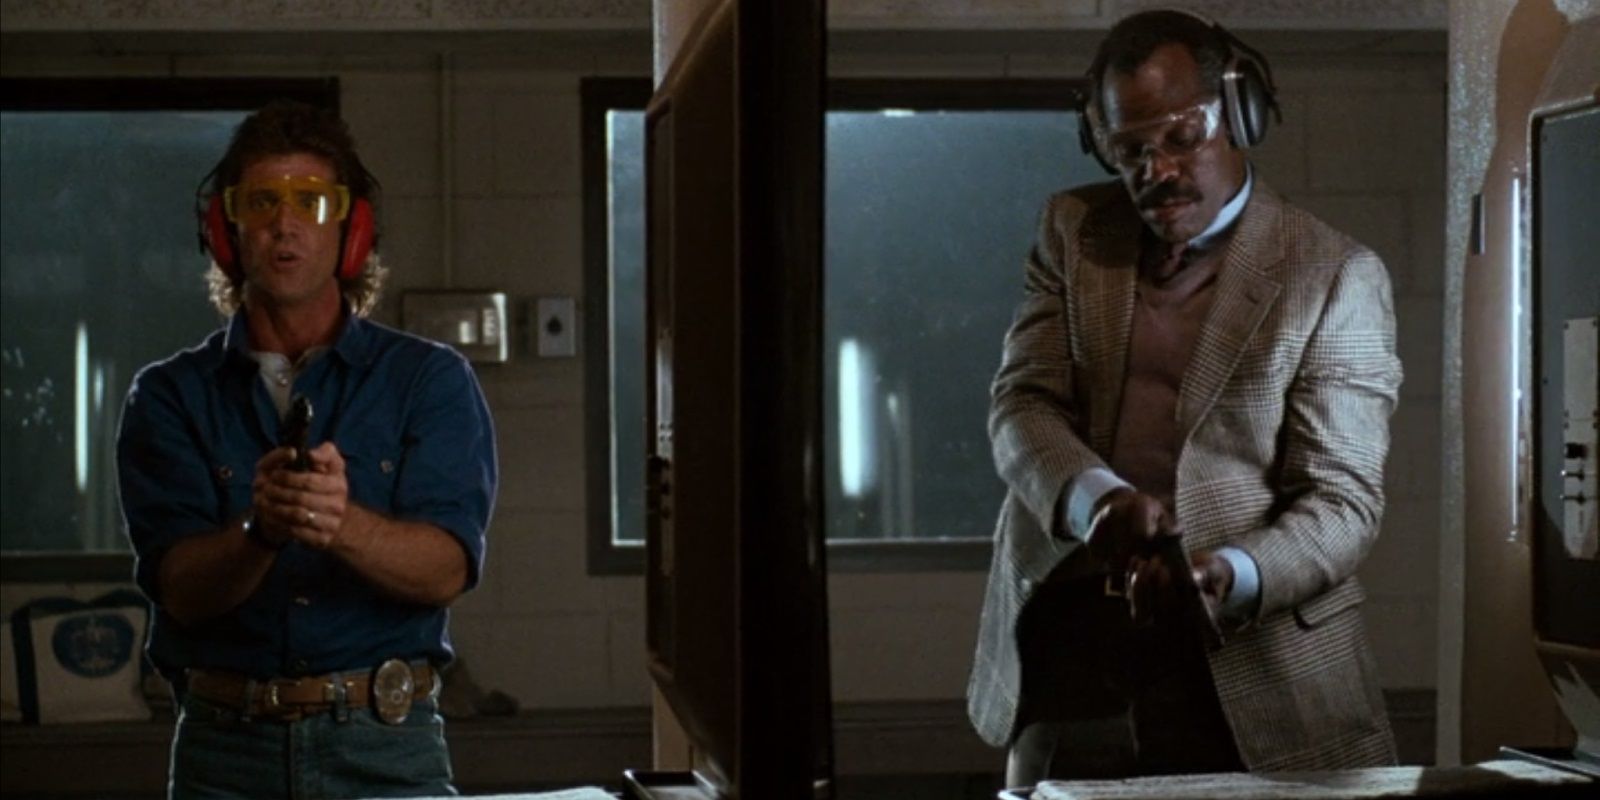 Riggs and Murtaugh in the firing range in Lethal Weapon